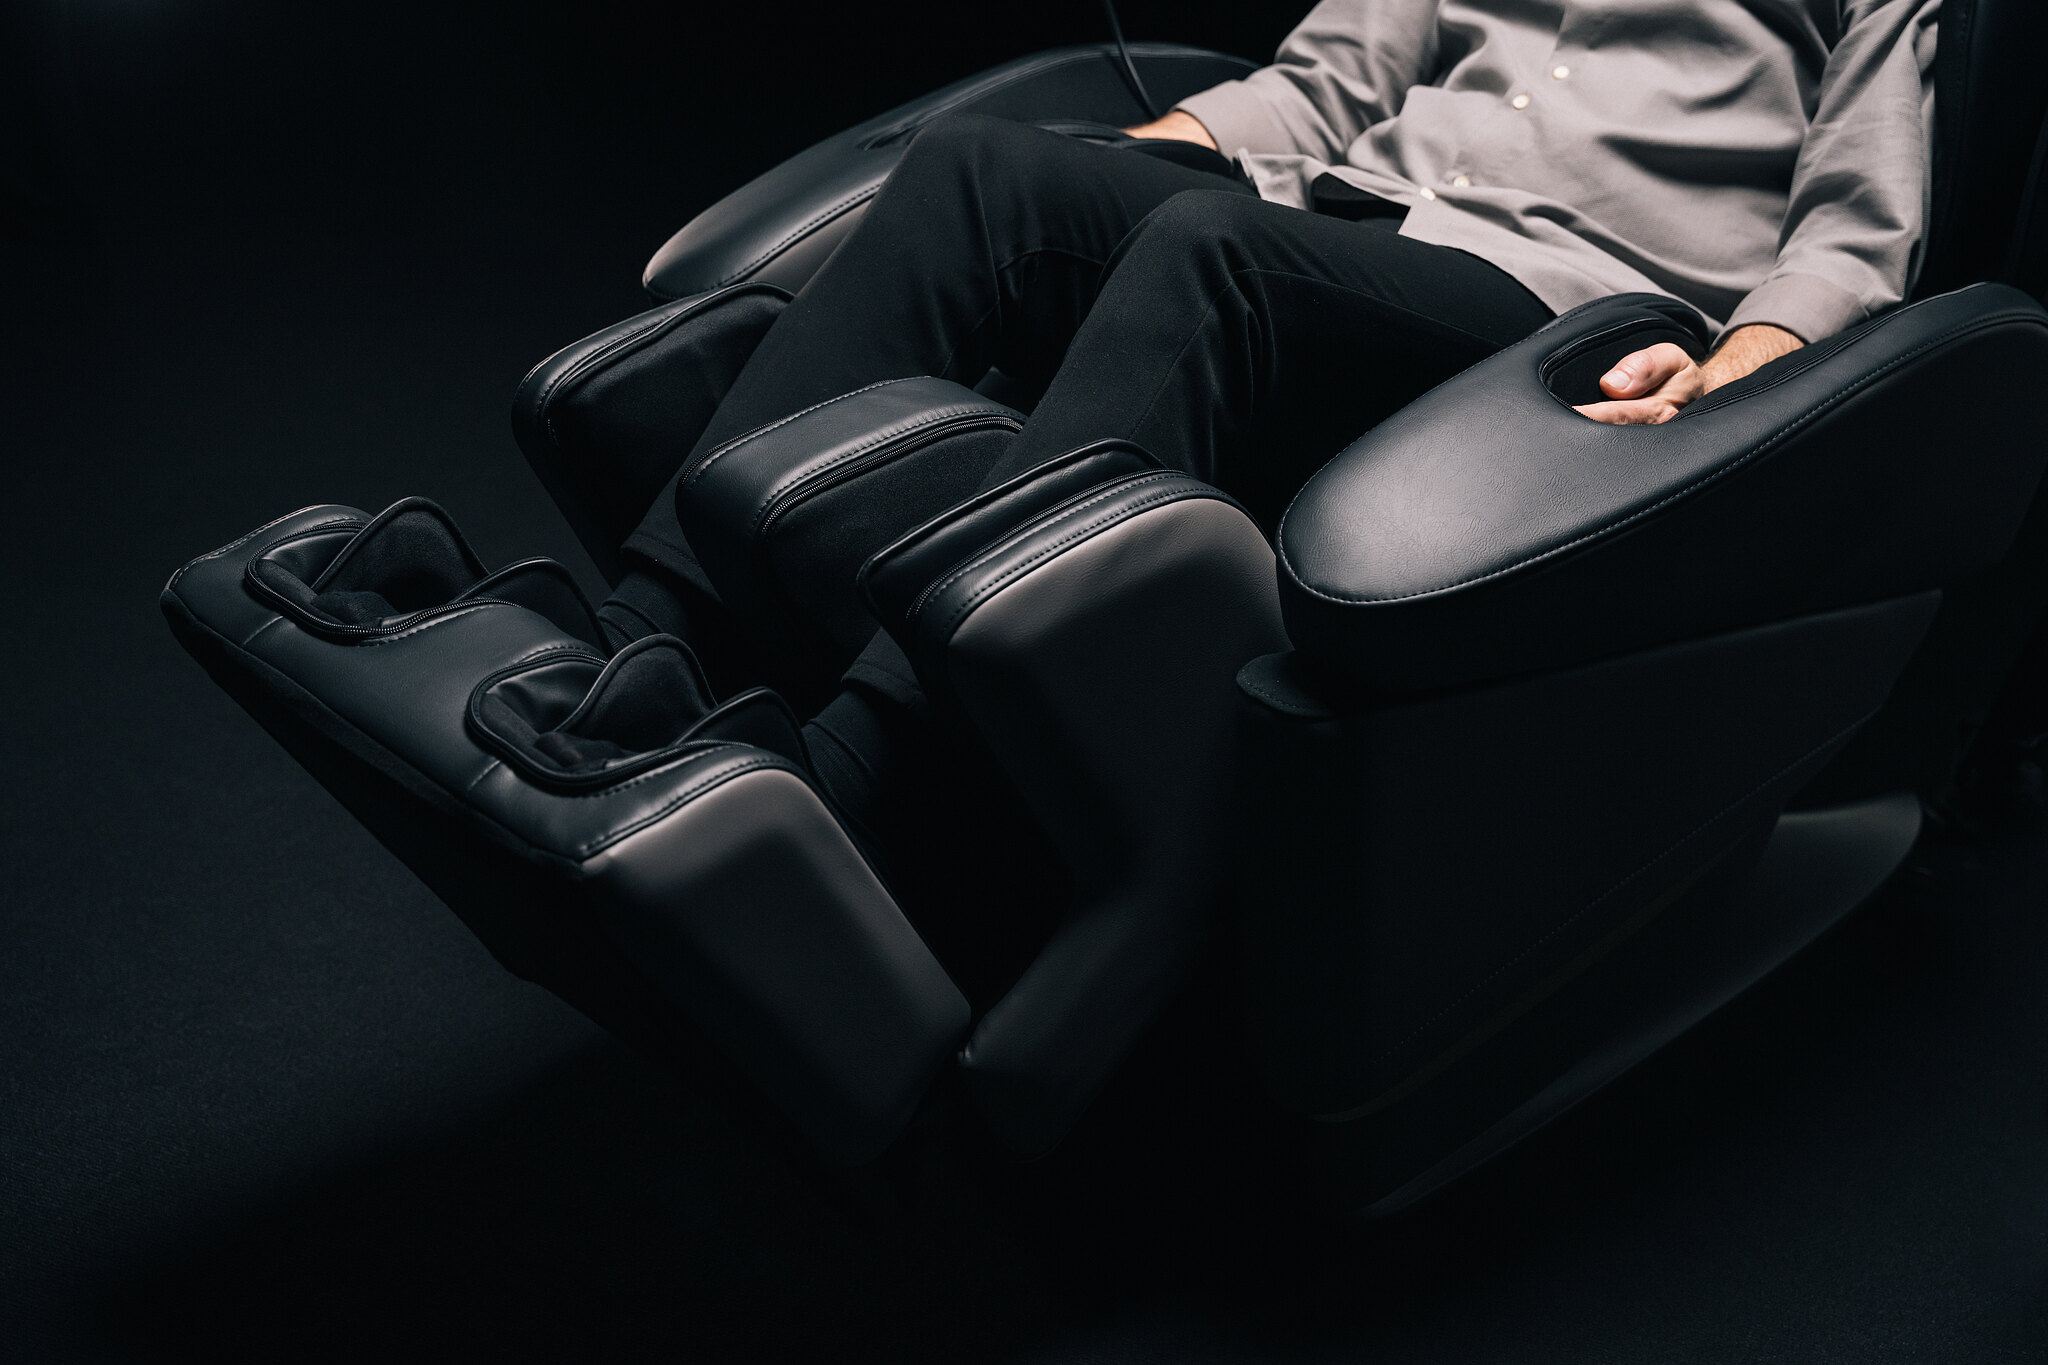 Foot reflexology and massage in a massage chair - Rest Lords